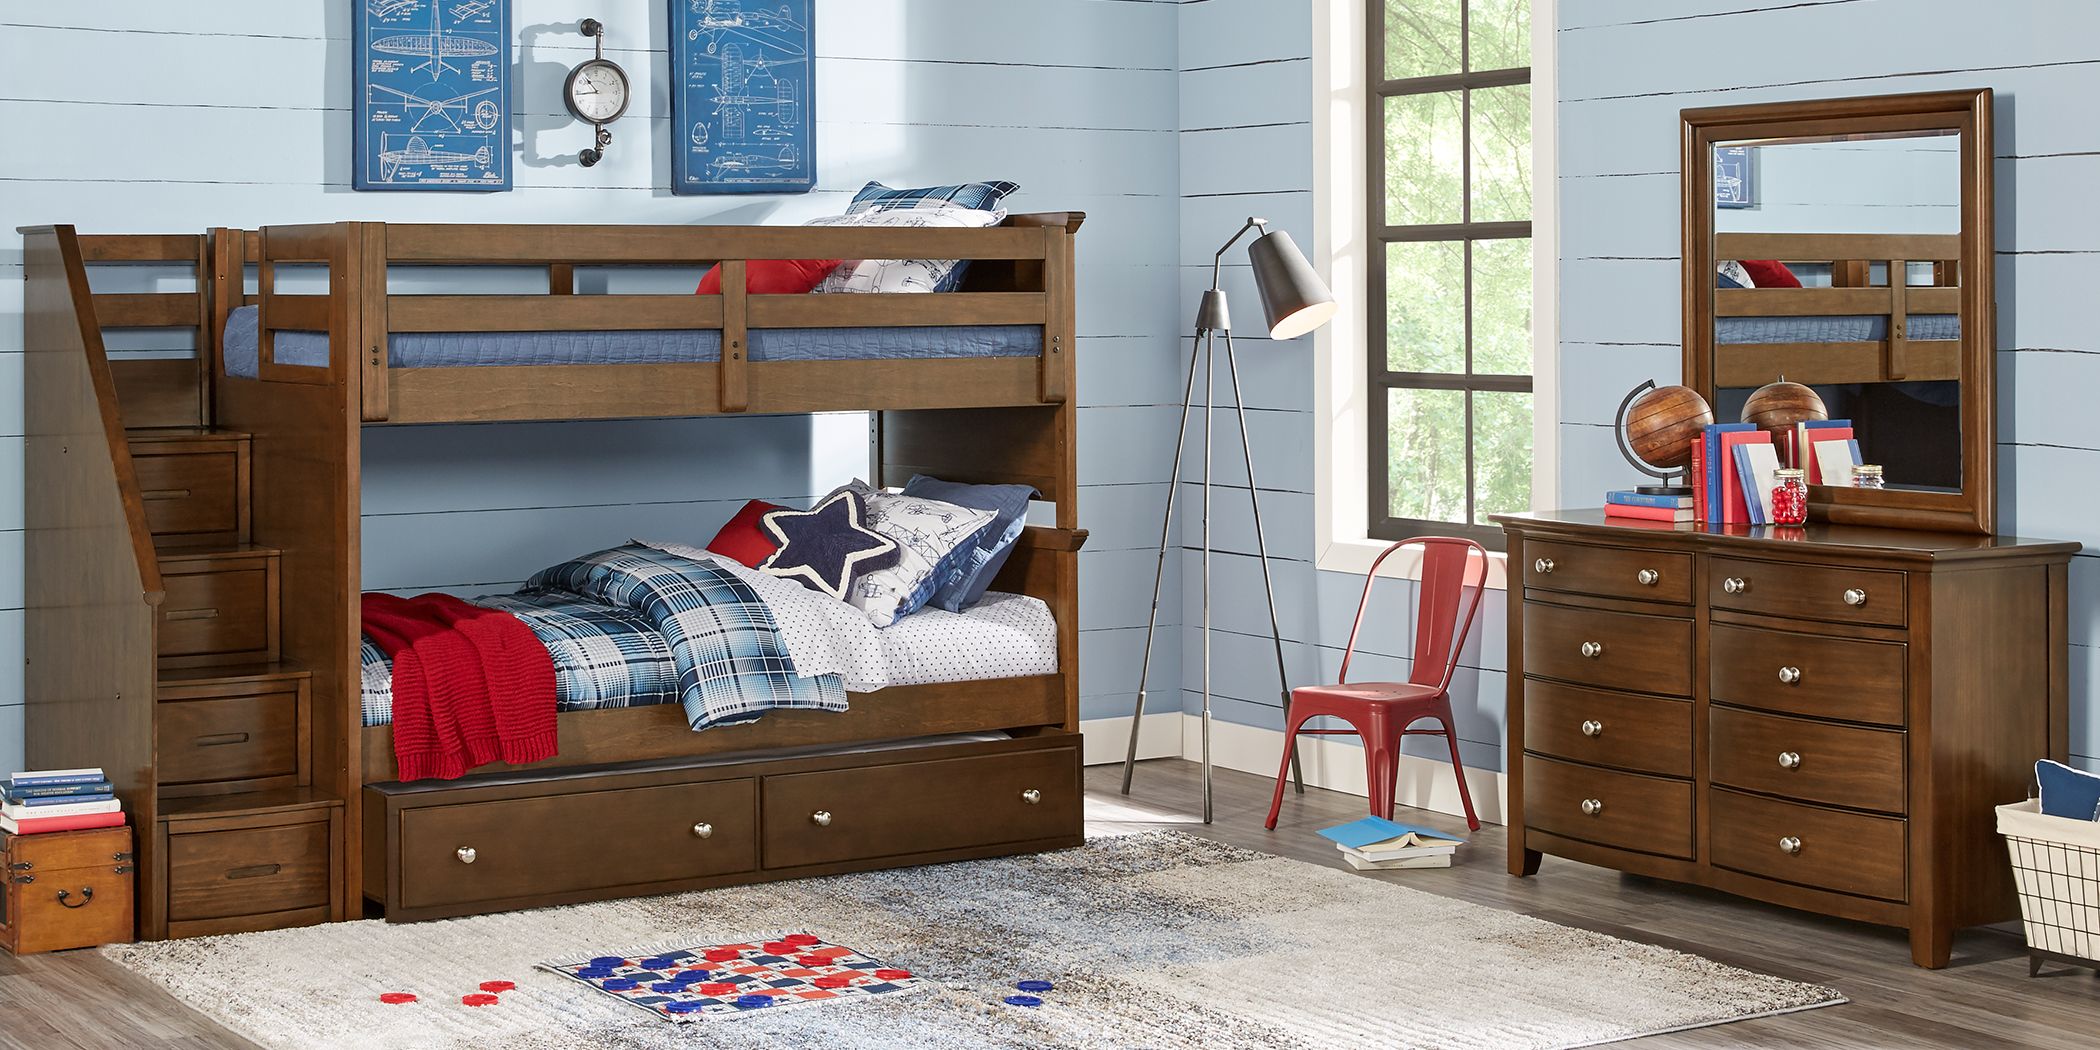 Ajh Baseball Bed Rooms To Go Hrdsindia Org, Ivy League Bunk Bed Assembly Instructions